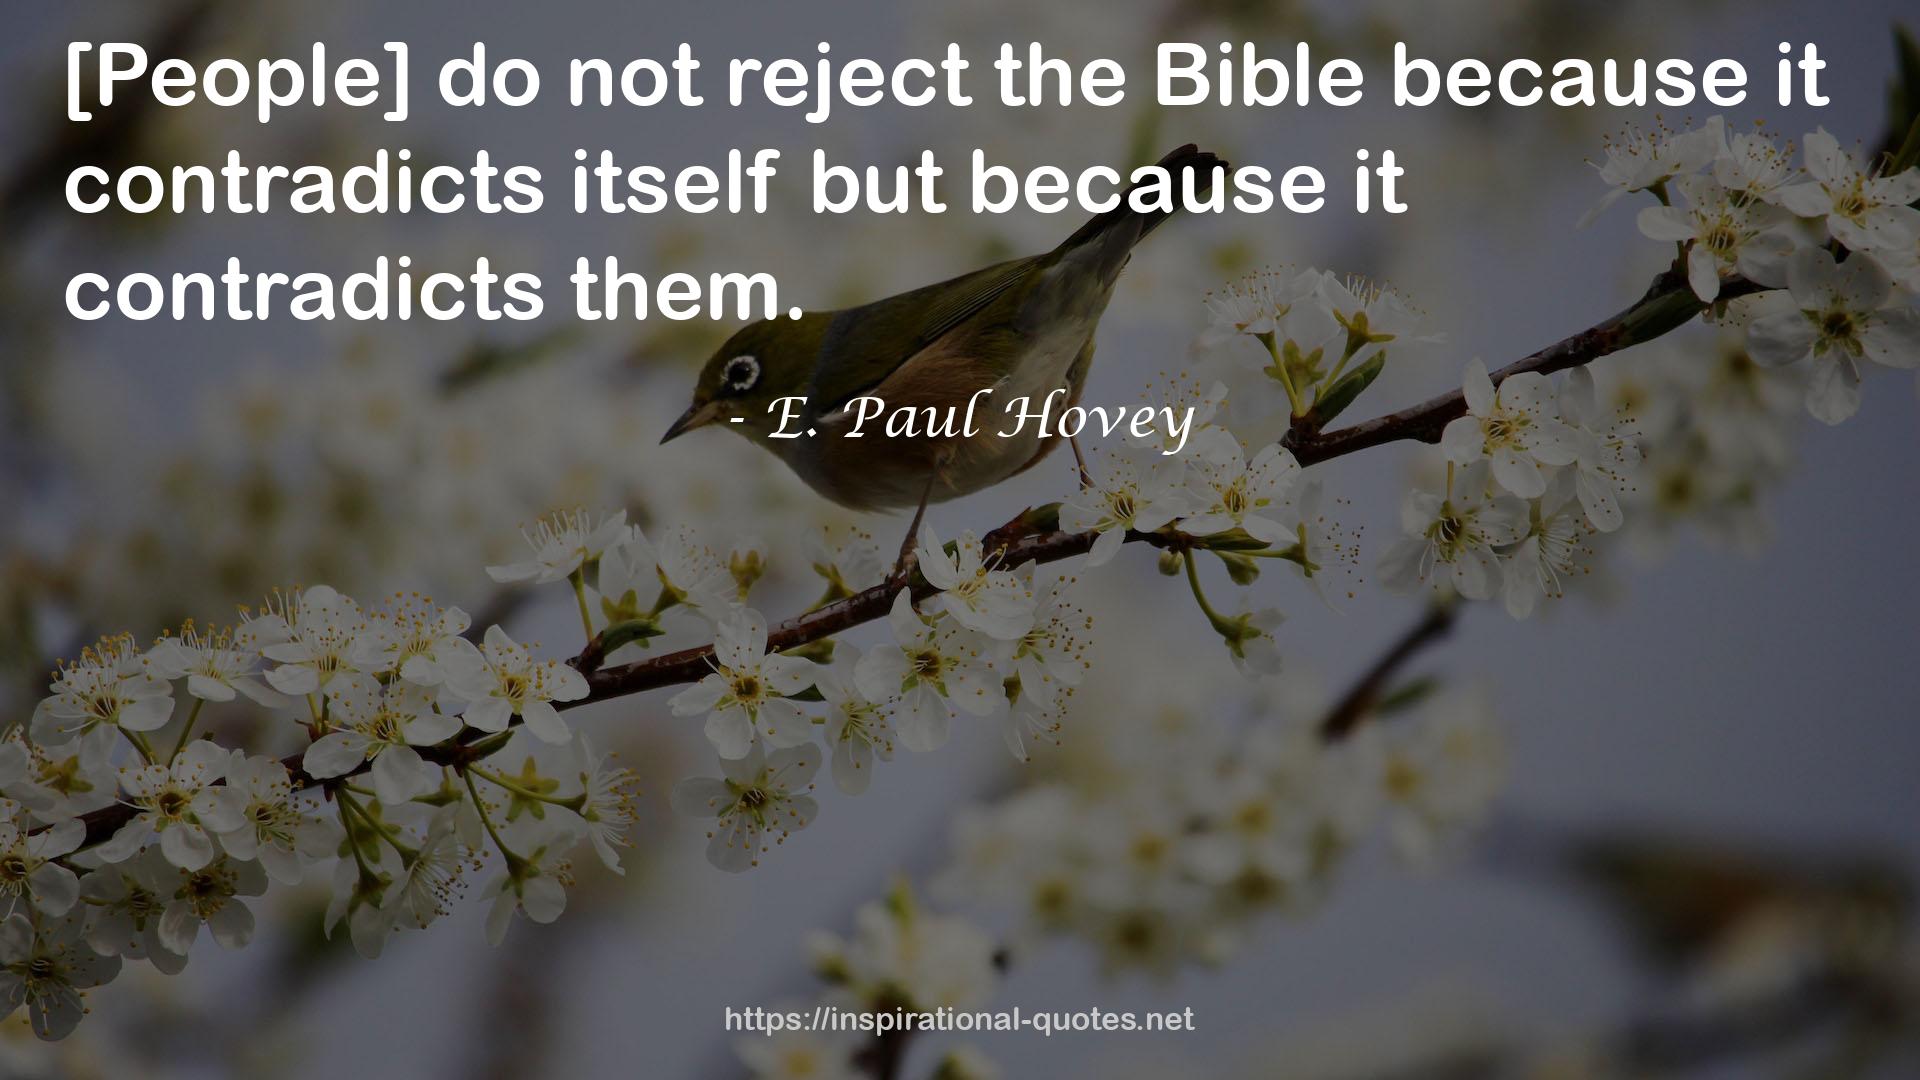 E. Paul Hovey QUOTES